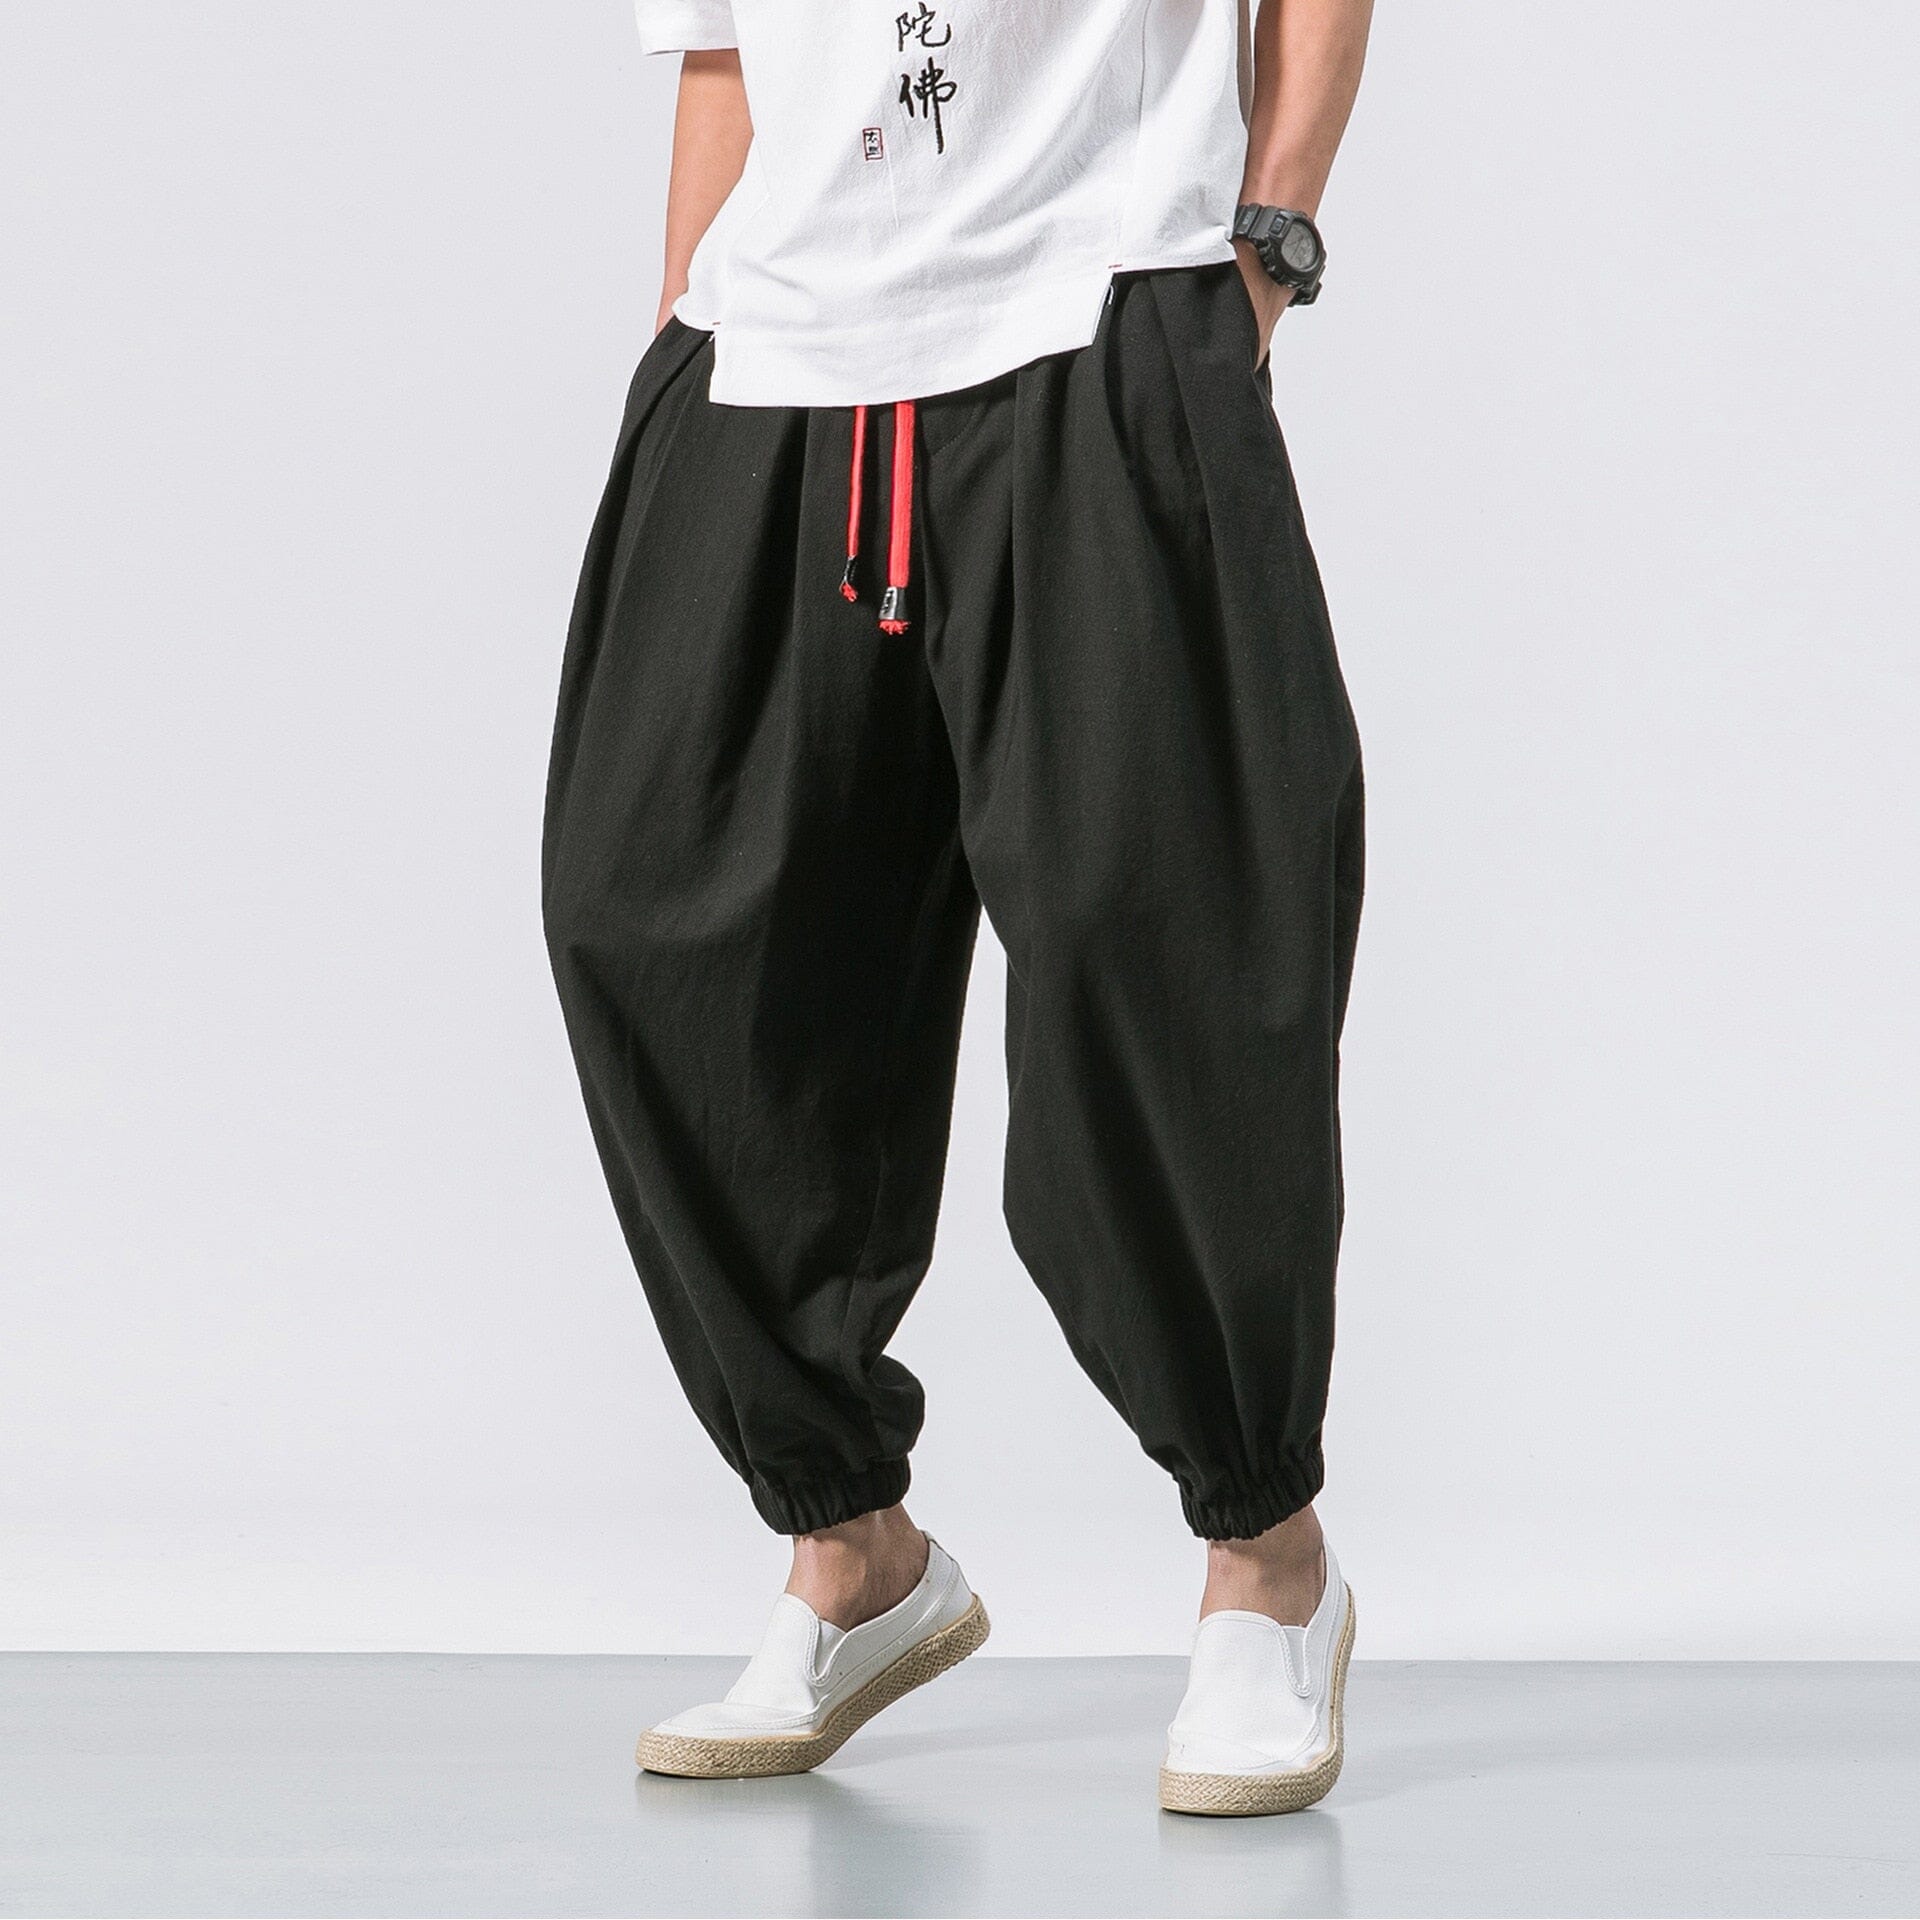 FGKKS Spring Men Loose Harem Pants Chinese Linen Overweight Sweatpants High Quality Casual Brand Oversize Trousers Male 0 GatoGeek 